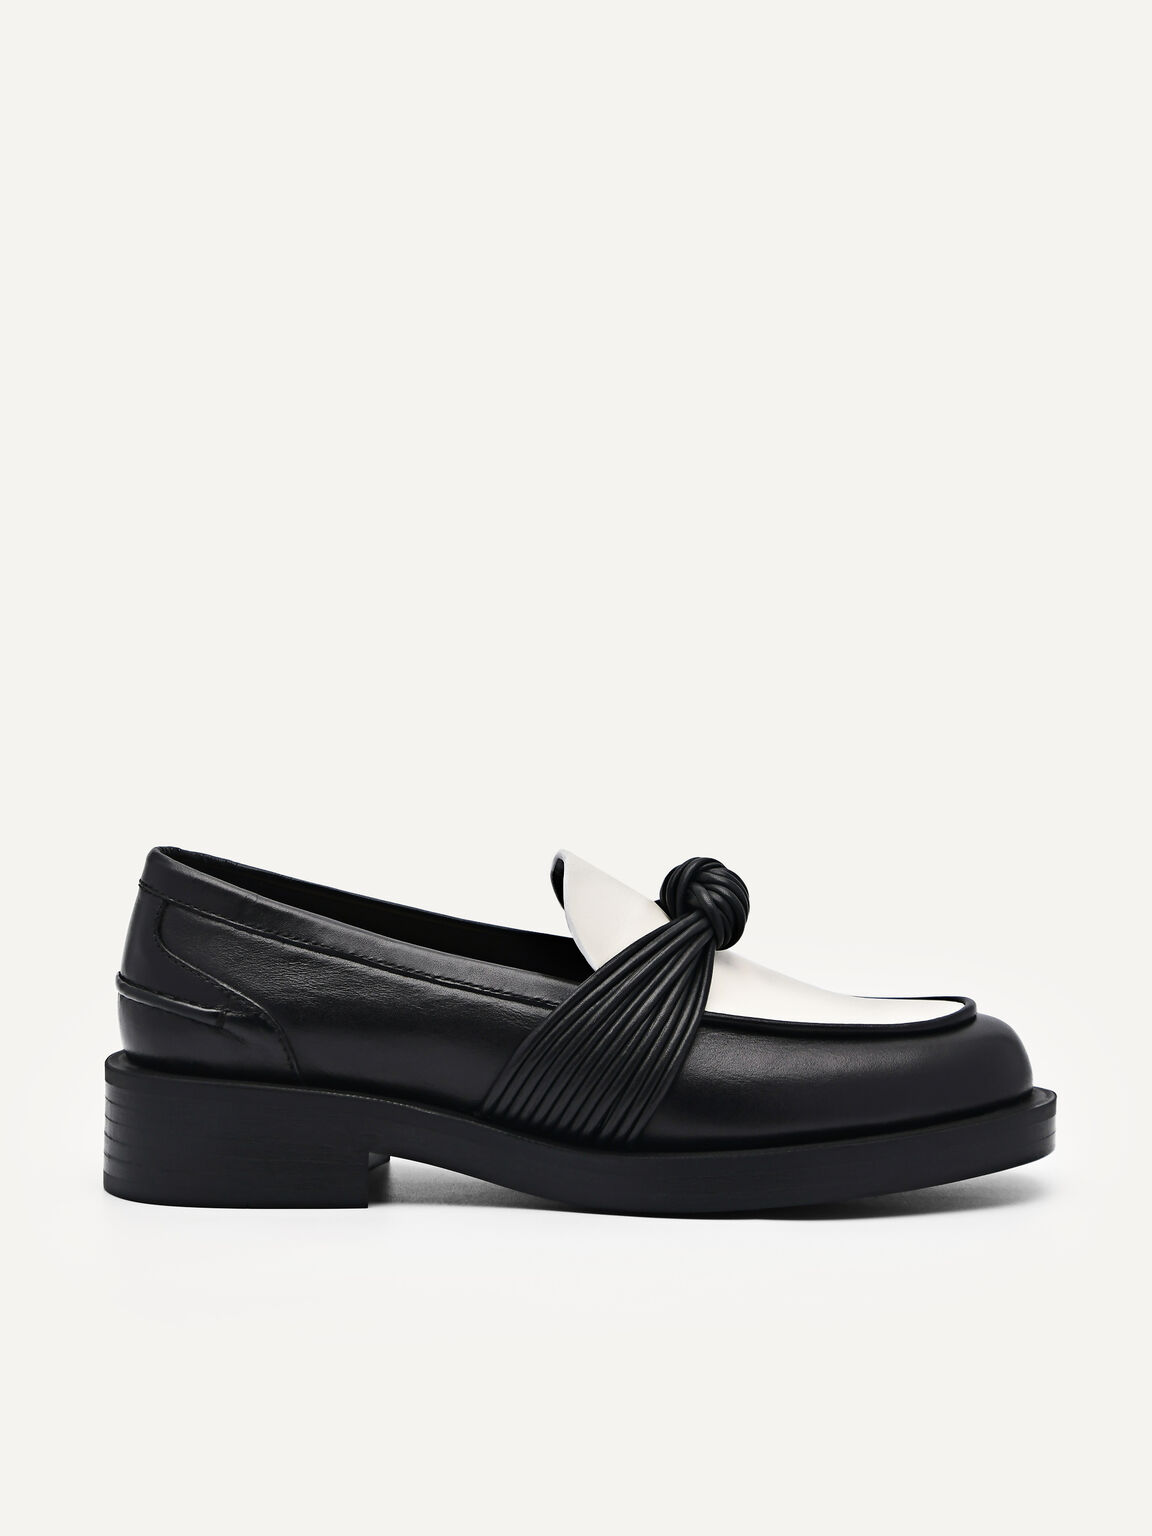 Leather Knot Loafers, Black